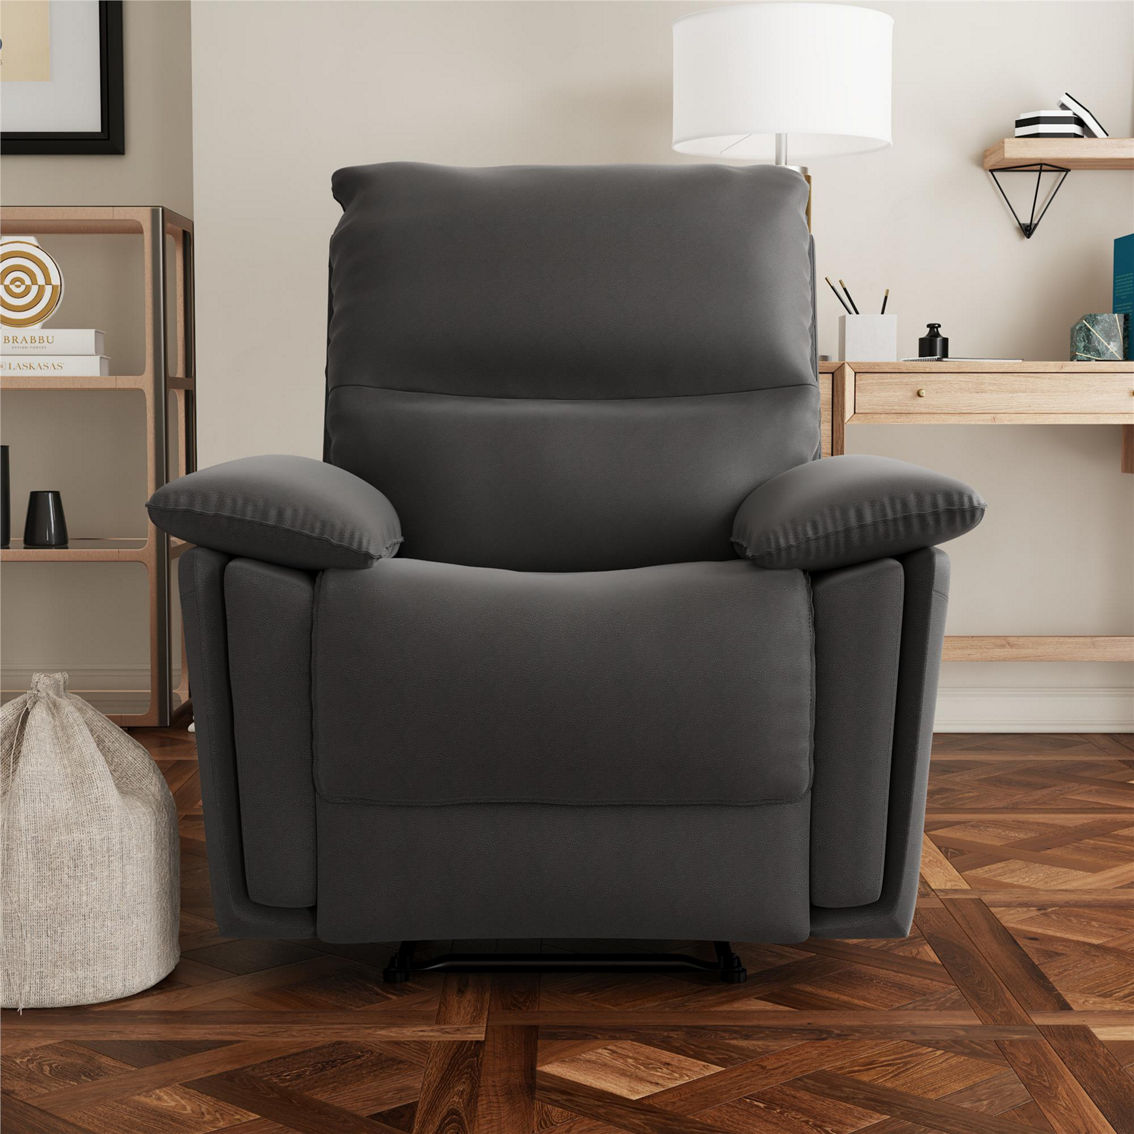 DHP Labatte Recliner with Dual USB Port, Charcoal Faux Leather - Image 6 of 8